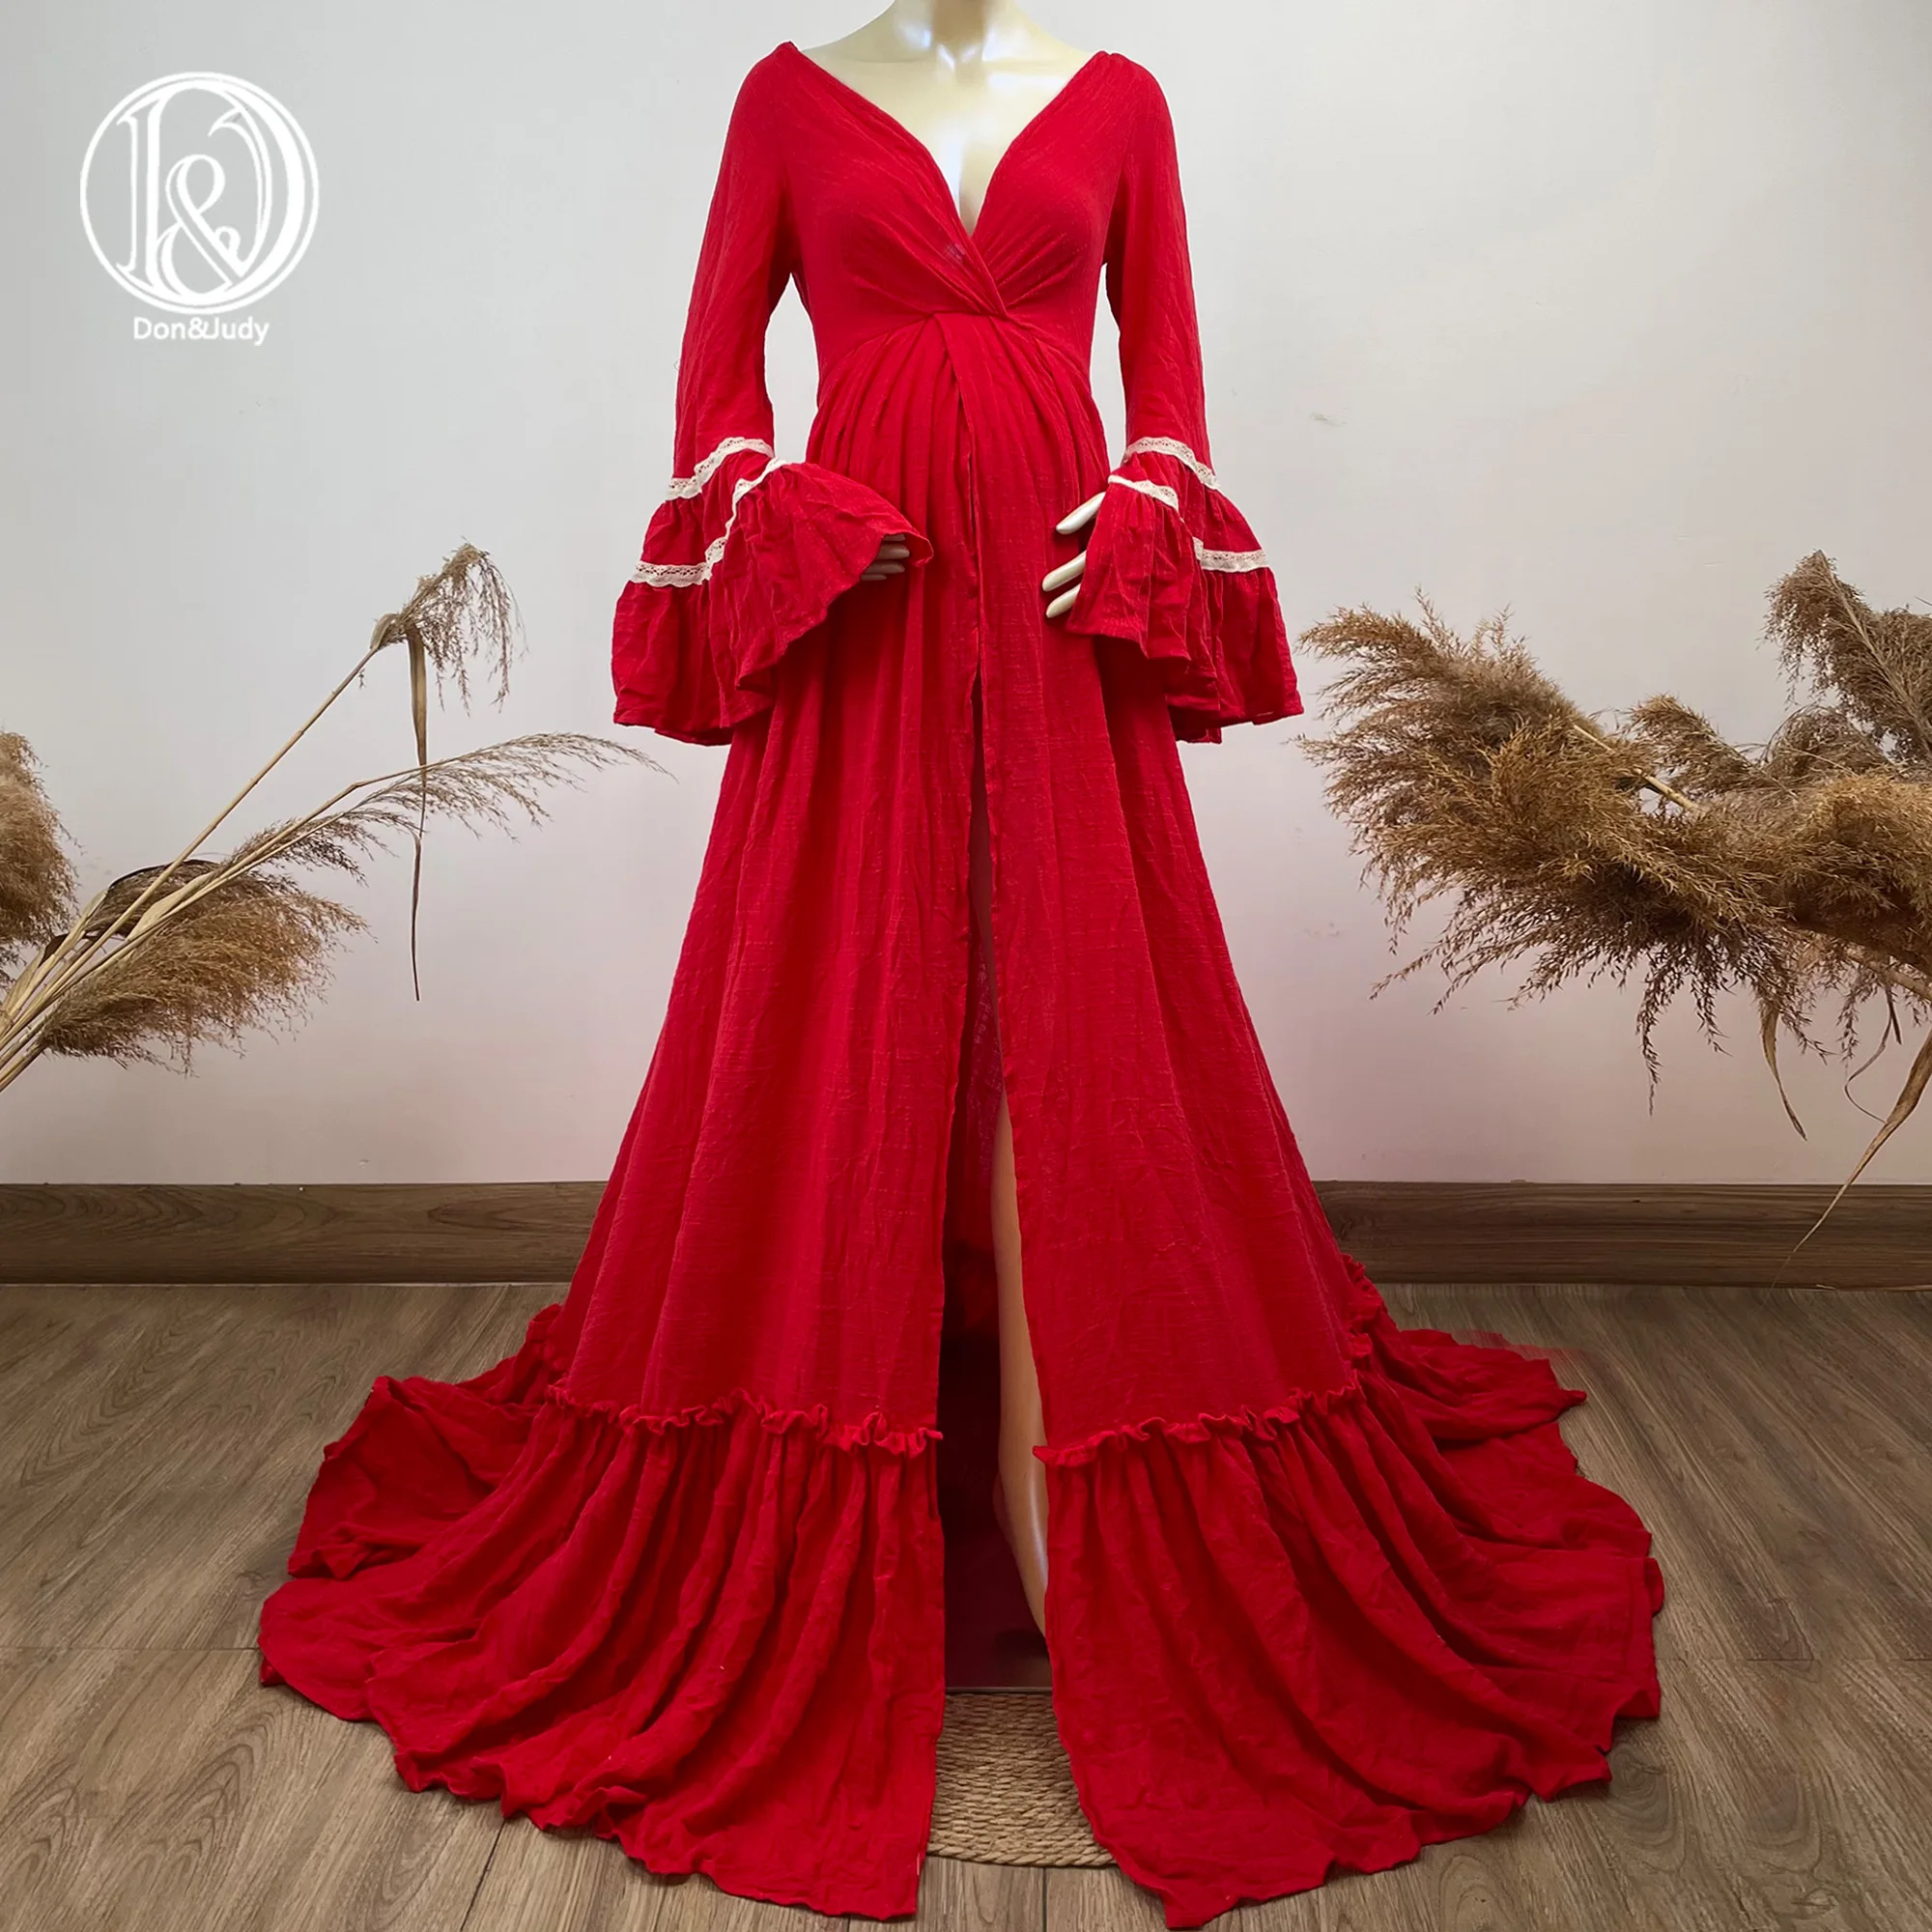 Don&Judy Flare Sleeves Christmas Maternity Or Non-maternity Dress for Photoshoot Pregnancy Photography Party Gown Woman Clothes enlarge